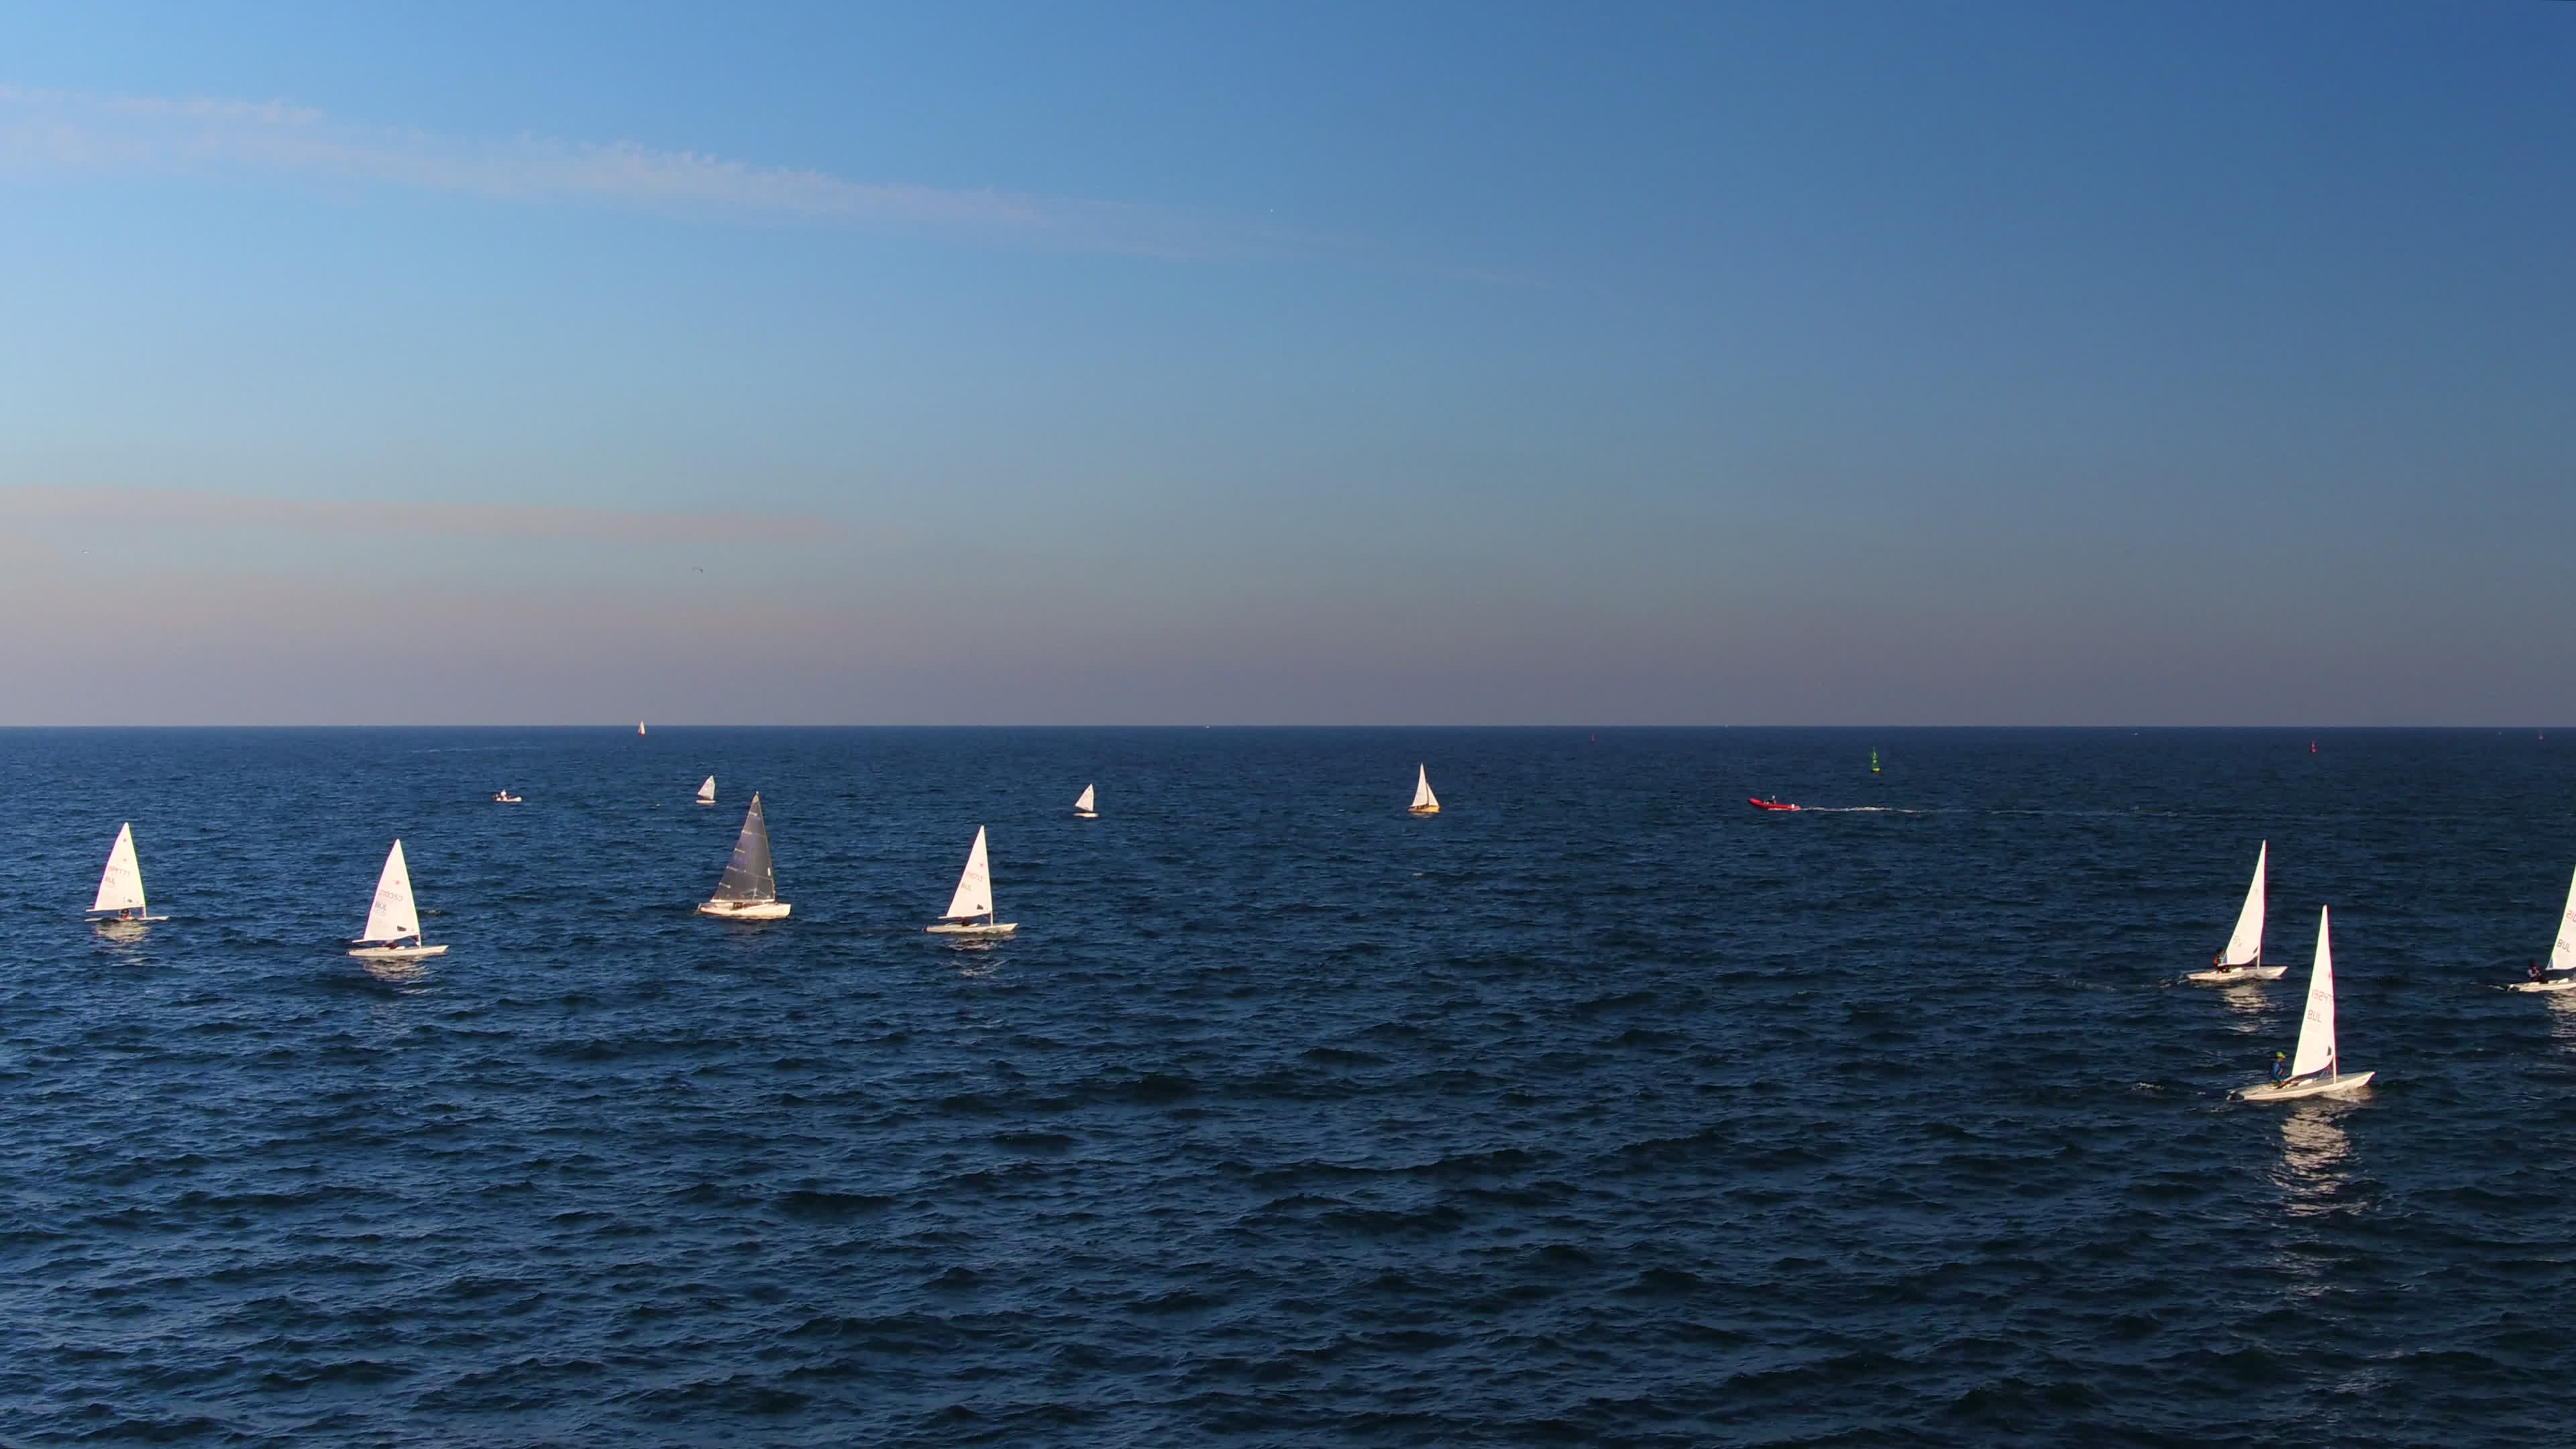 Sailing: Boats competing in the regatta, Sea, An active water sport, Boating. 3840x2160 4K Wallpaper.